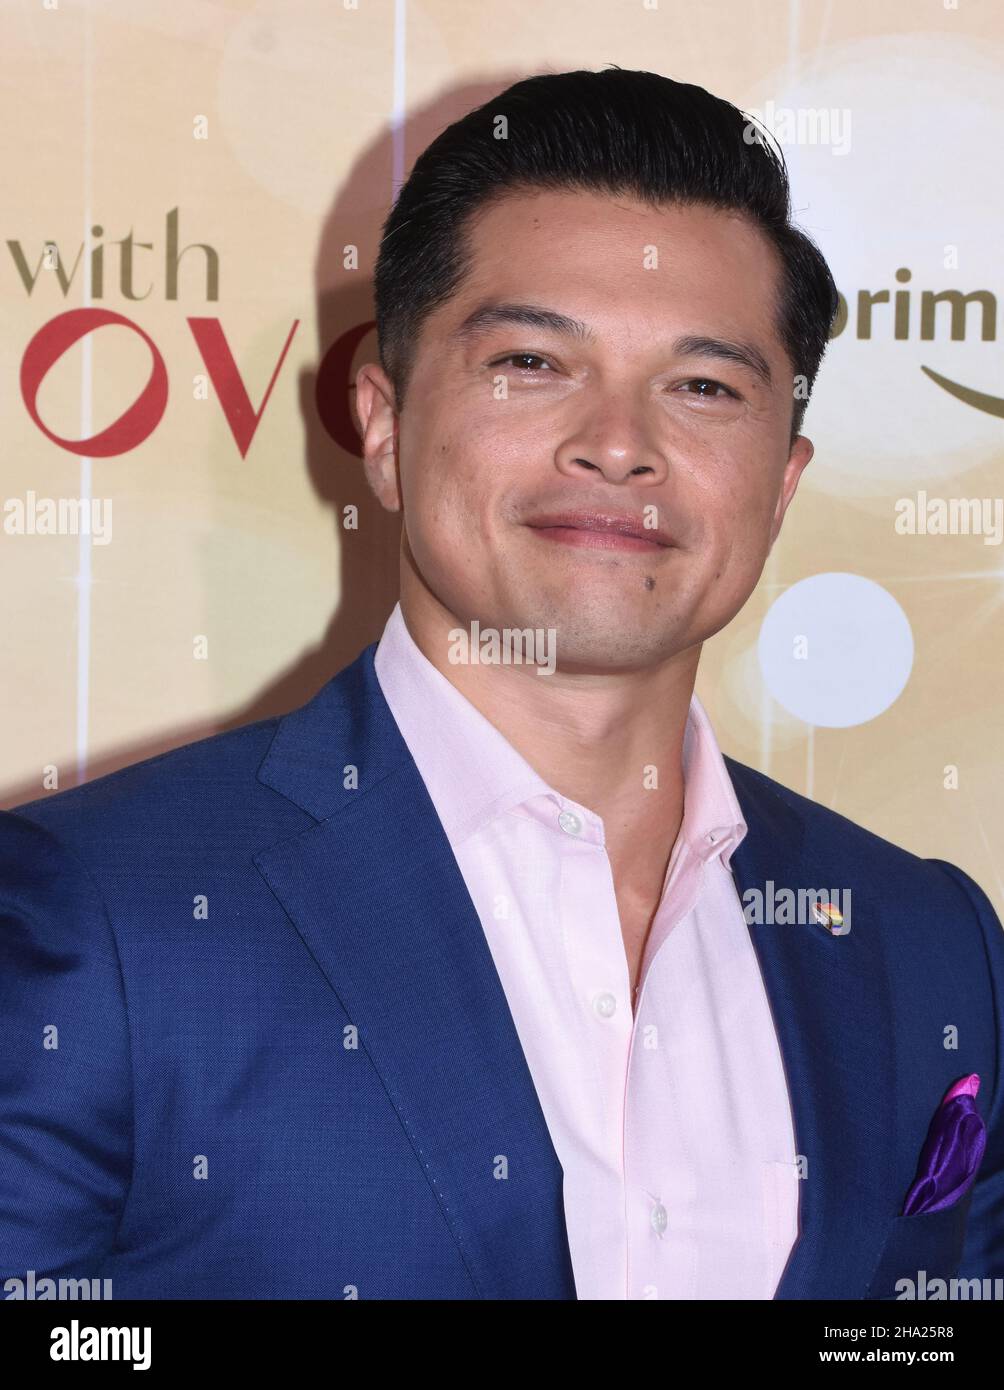 Los Angeles, California, USA. 9th Dec, 2021. Actor Vincent Rodriguez III attends Prime Video's 'With Love' Season One Red Carpet at Neuehouse Hollywood on December 9, 2021 in Los Angeles, California, USA. Credit: Barry King/Alamy Live News Stock Photo